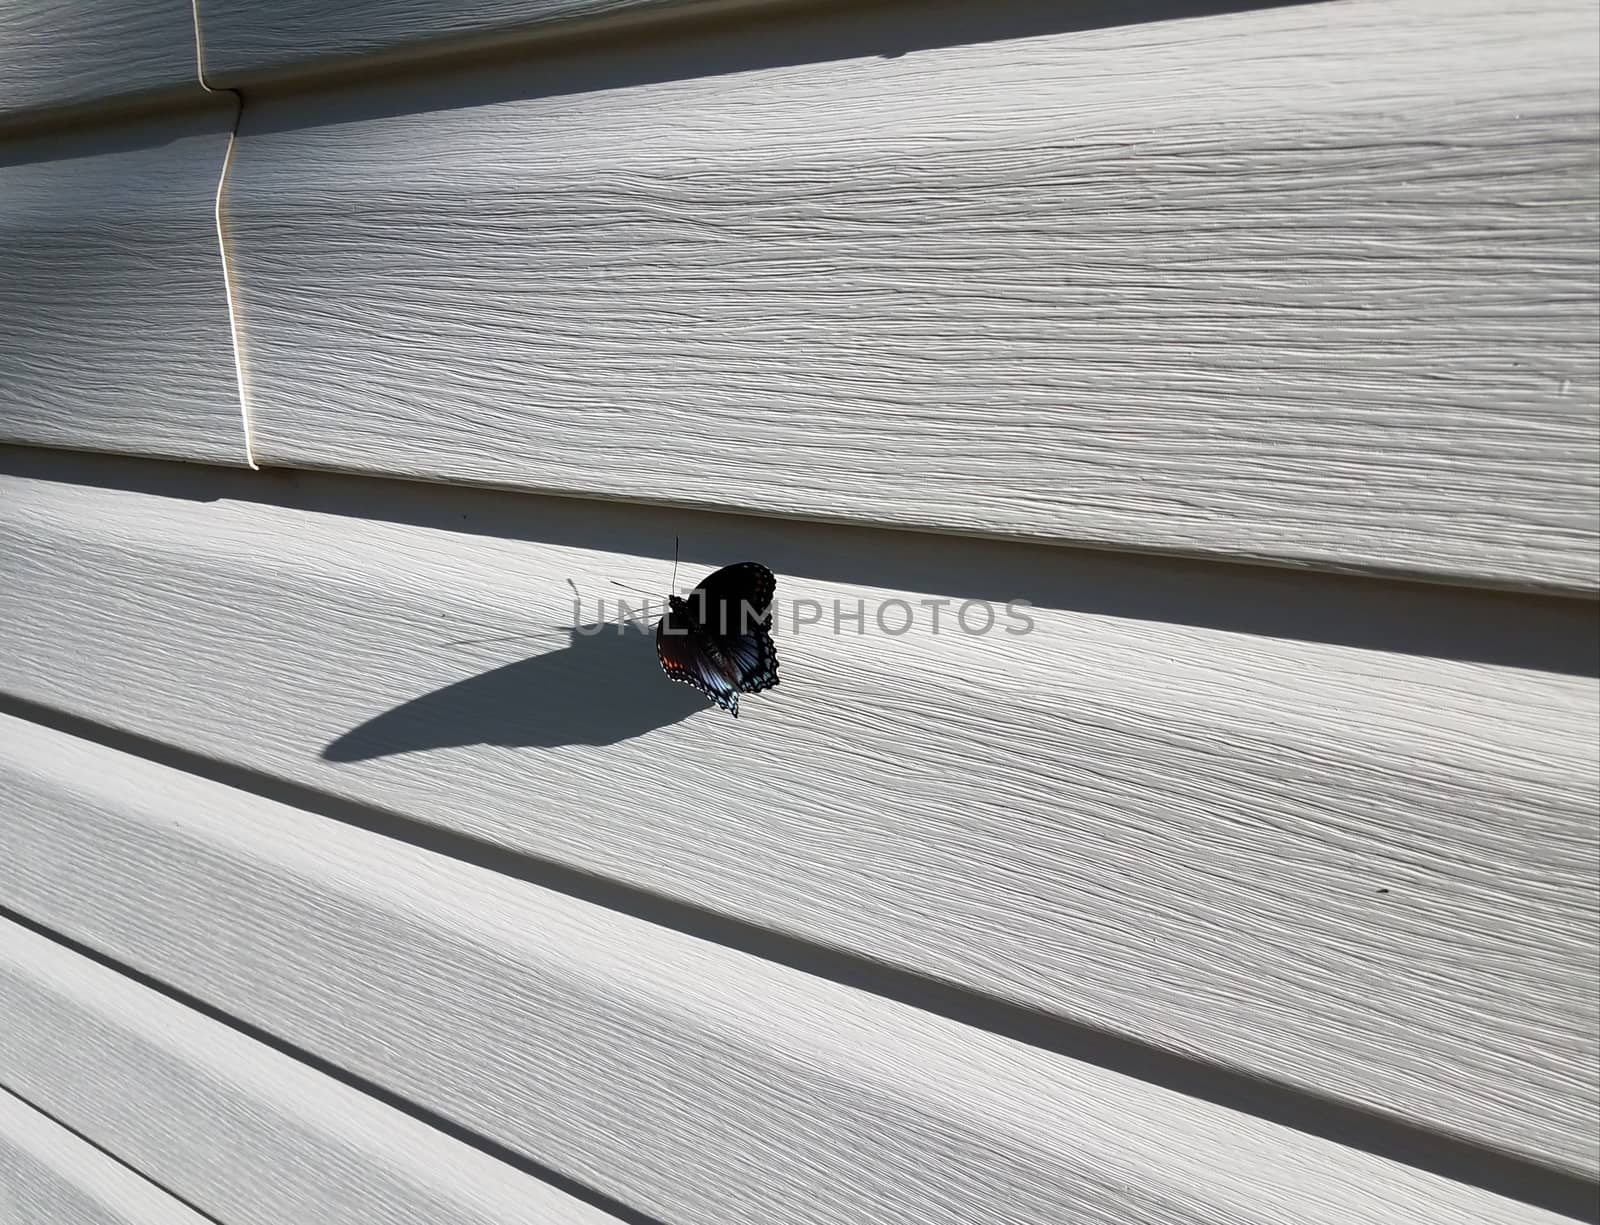 black butterfly with orange and blue wings on white house siding by stockphotofan1